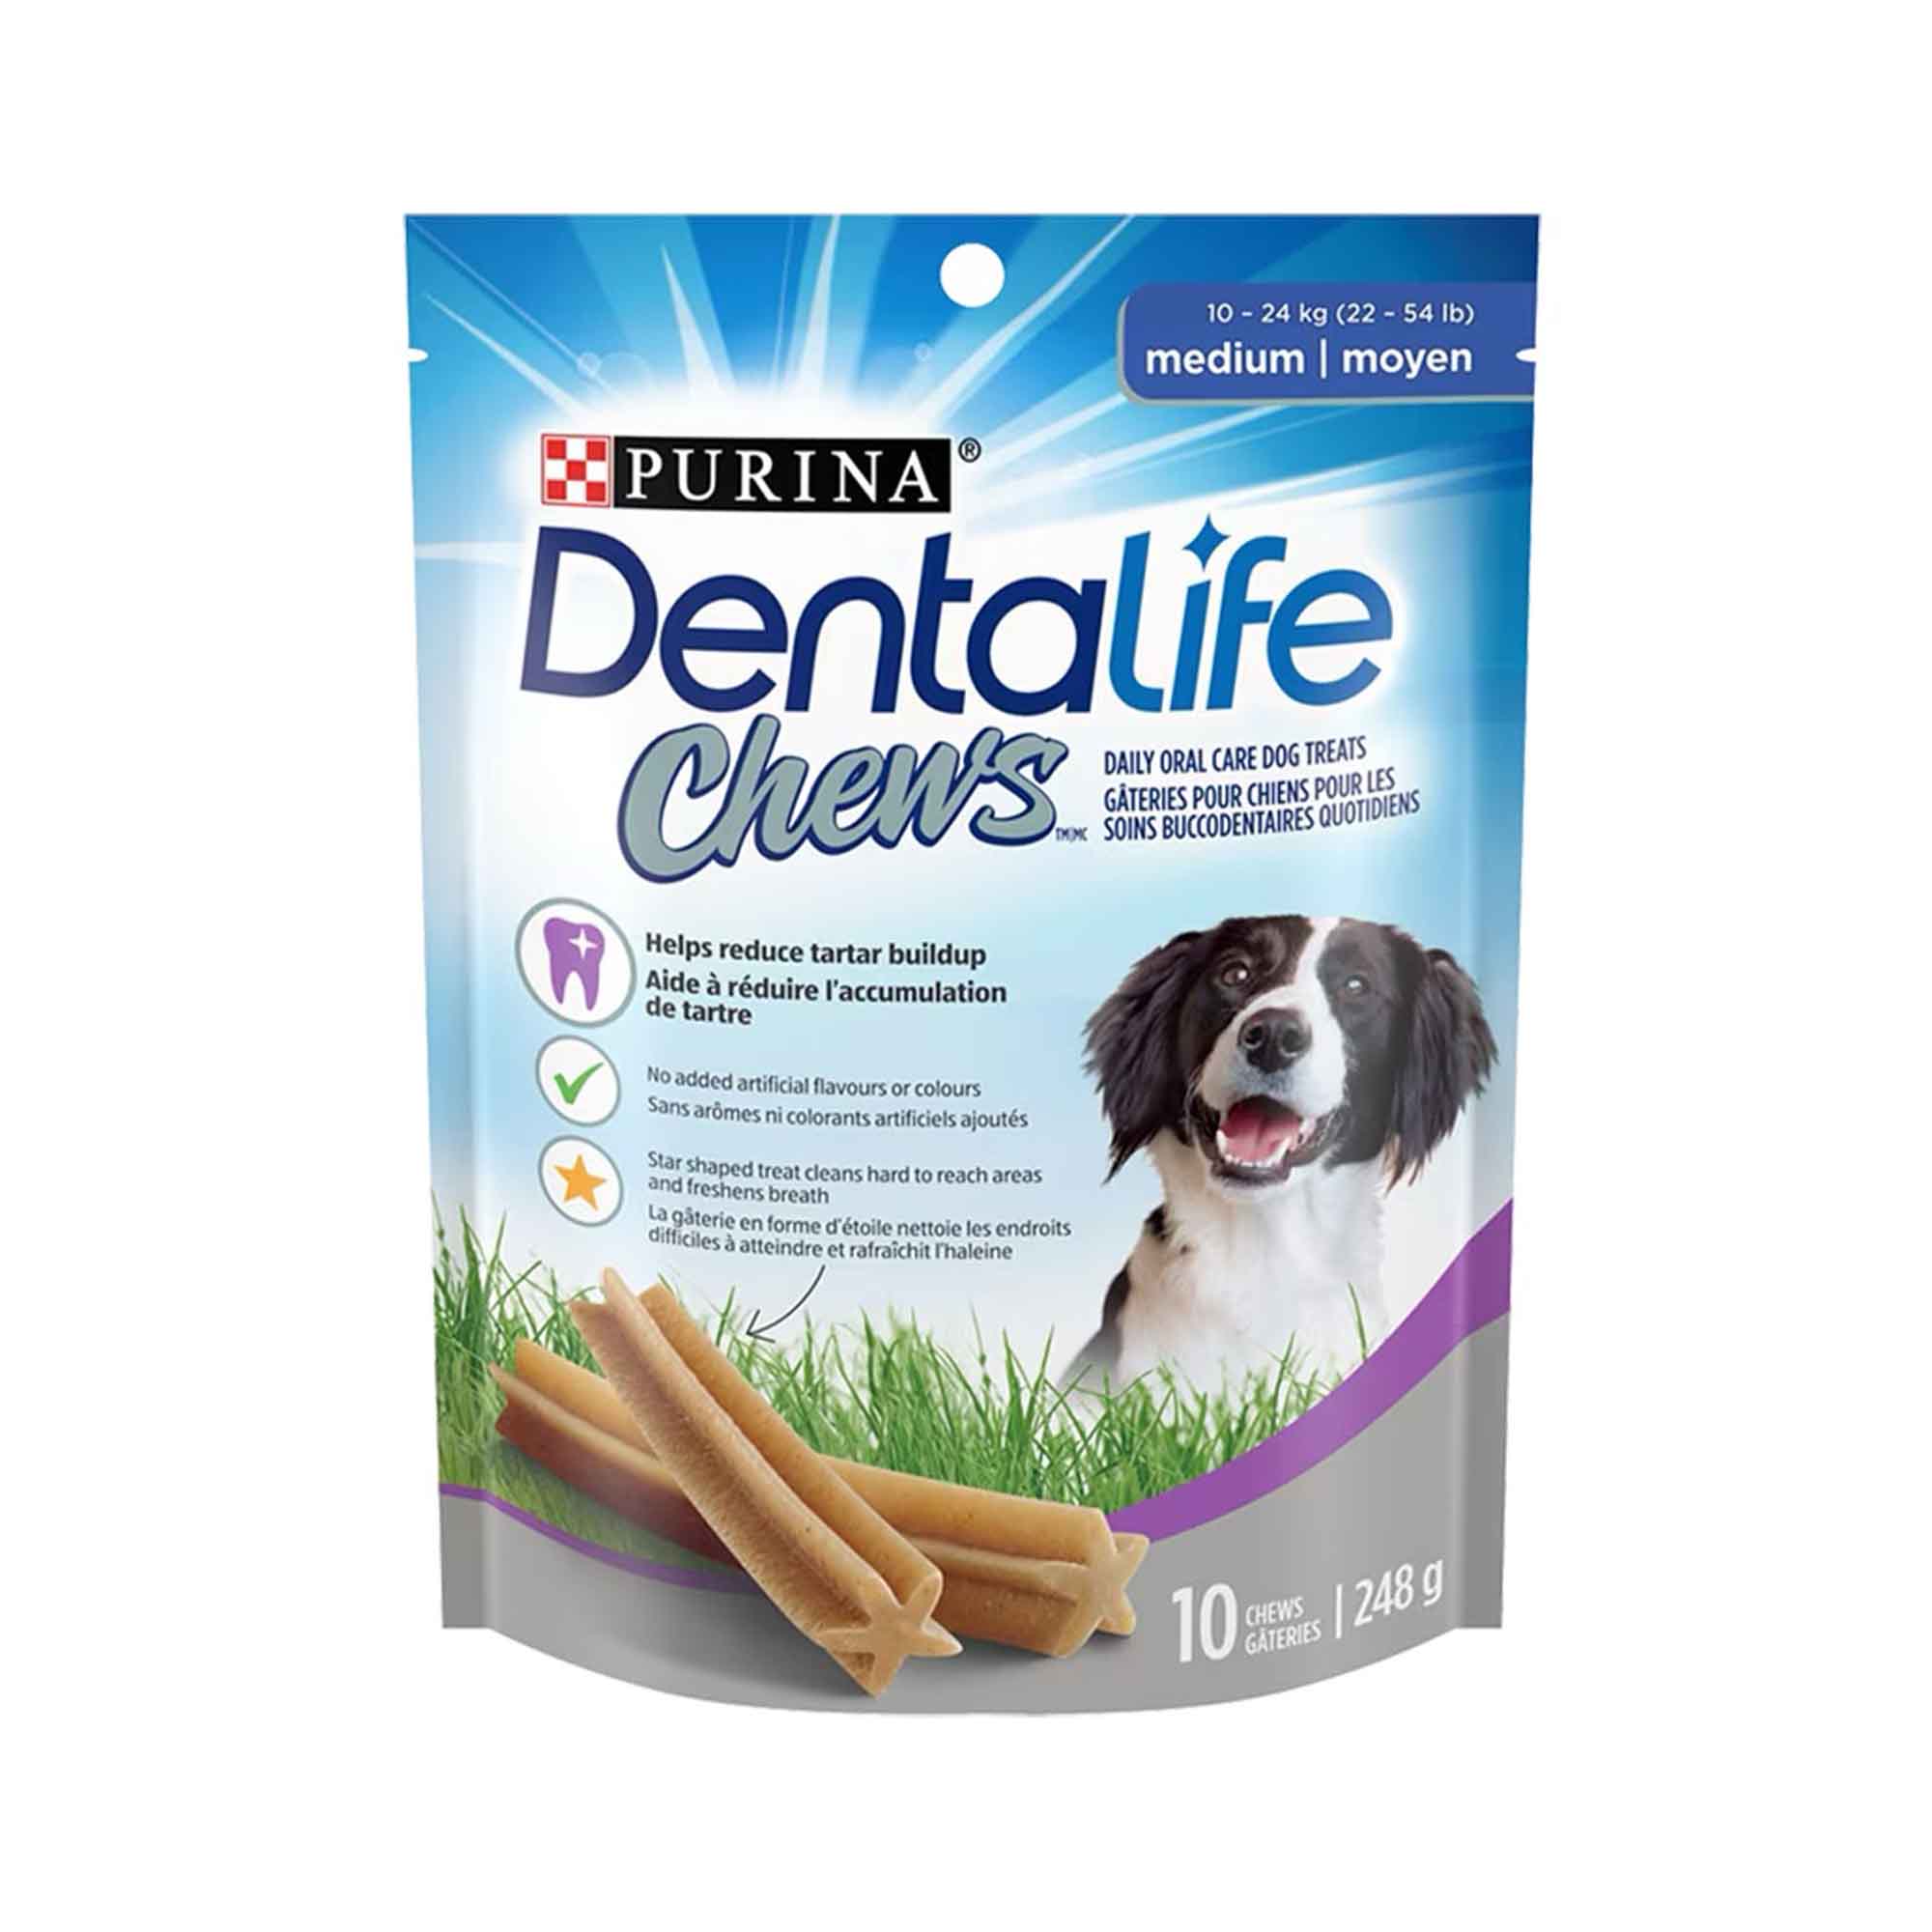 Purina DentaLife Chews™ Medium Daily Treats for Dogs - Oral Care